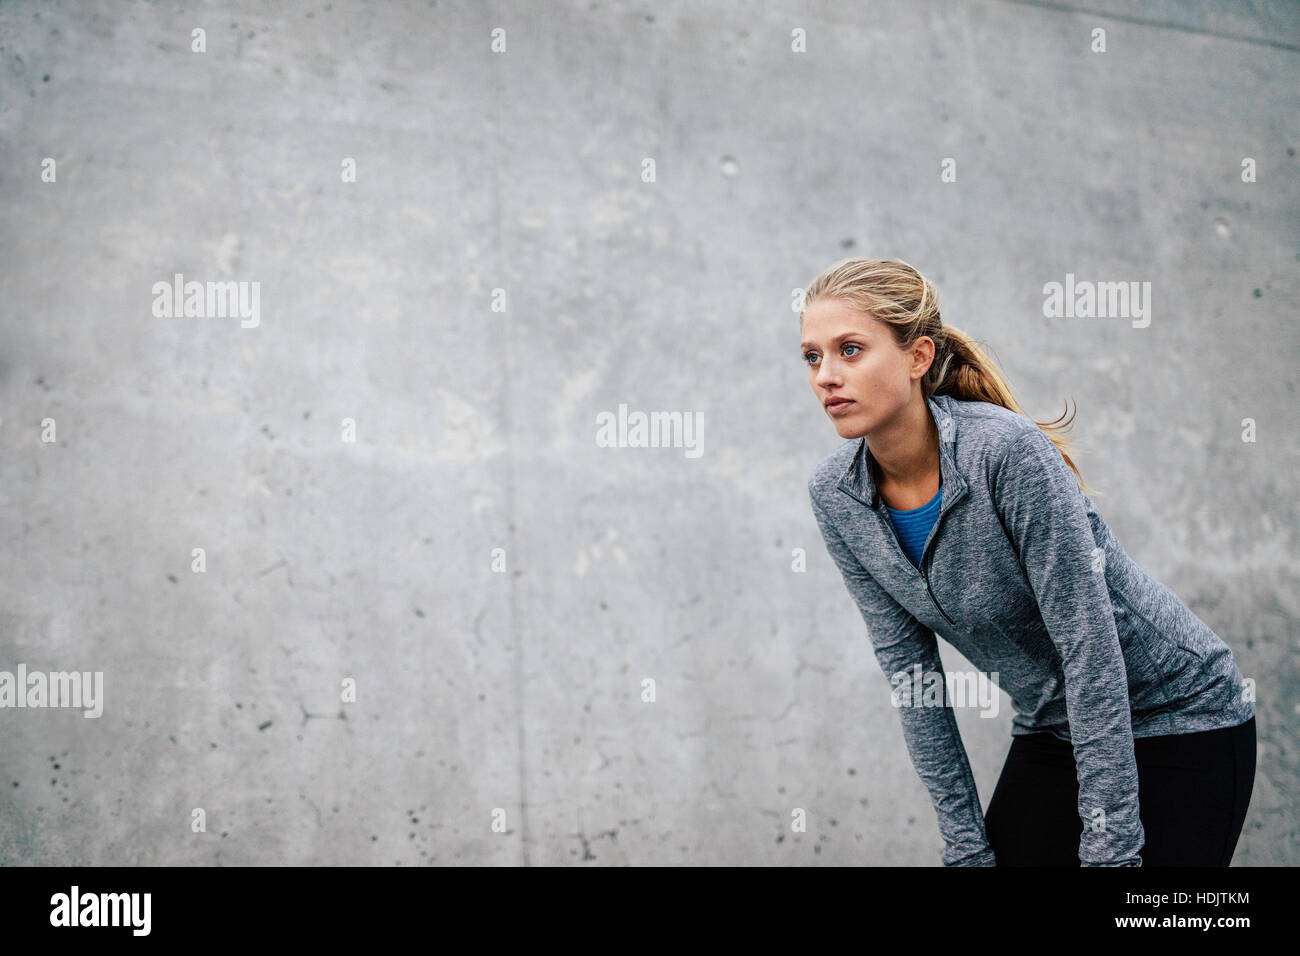 Young sports woman taking break after a run. Focused female runner standing bend over after a running session in city. Stock Photo